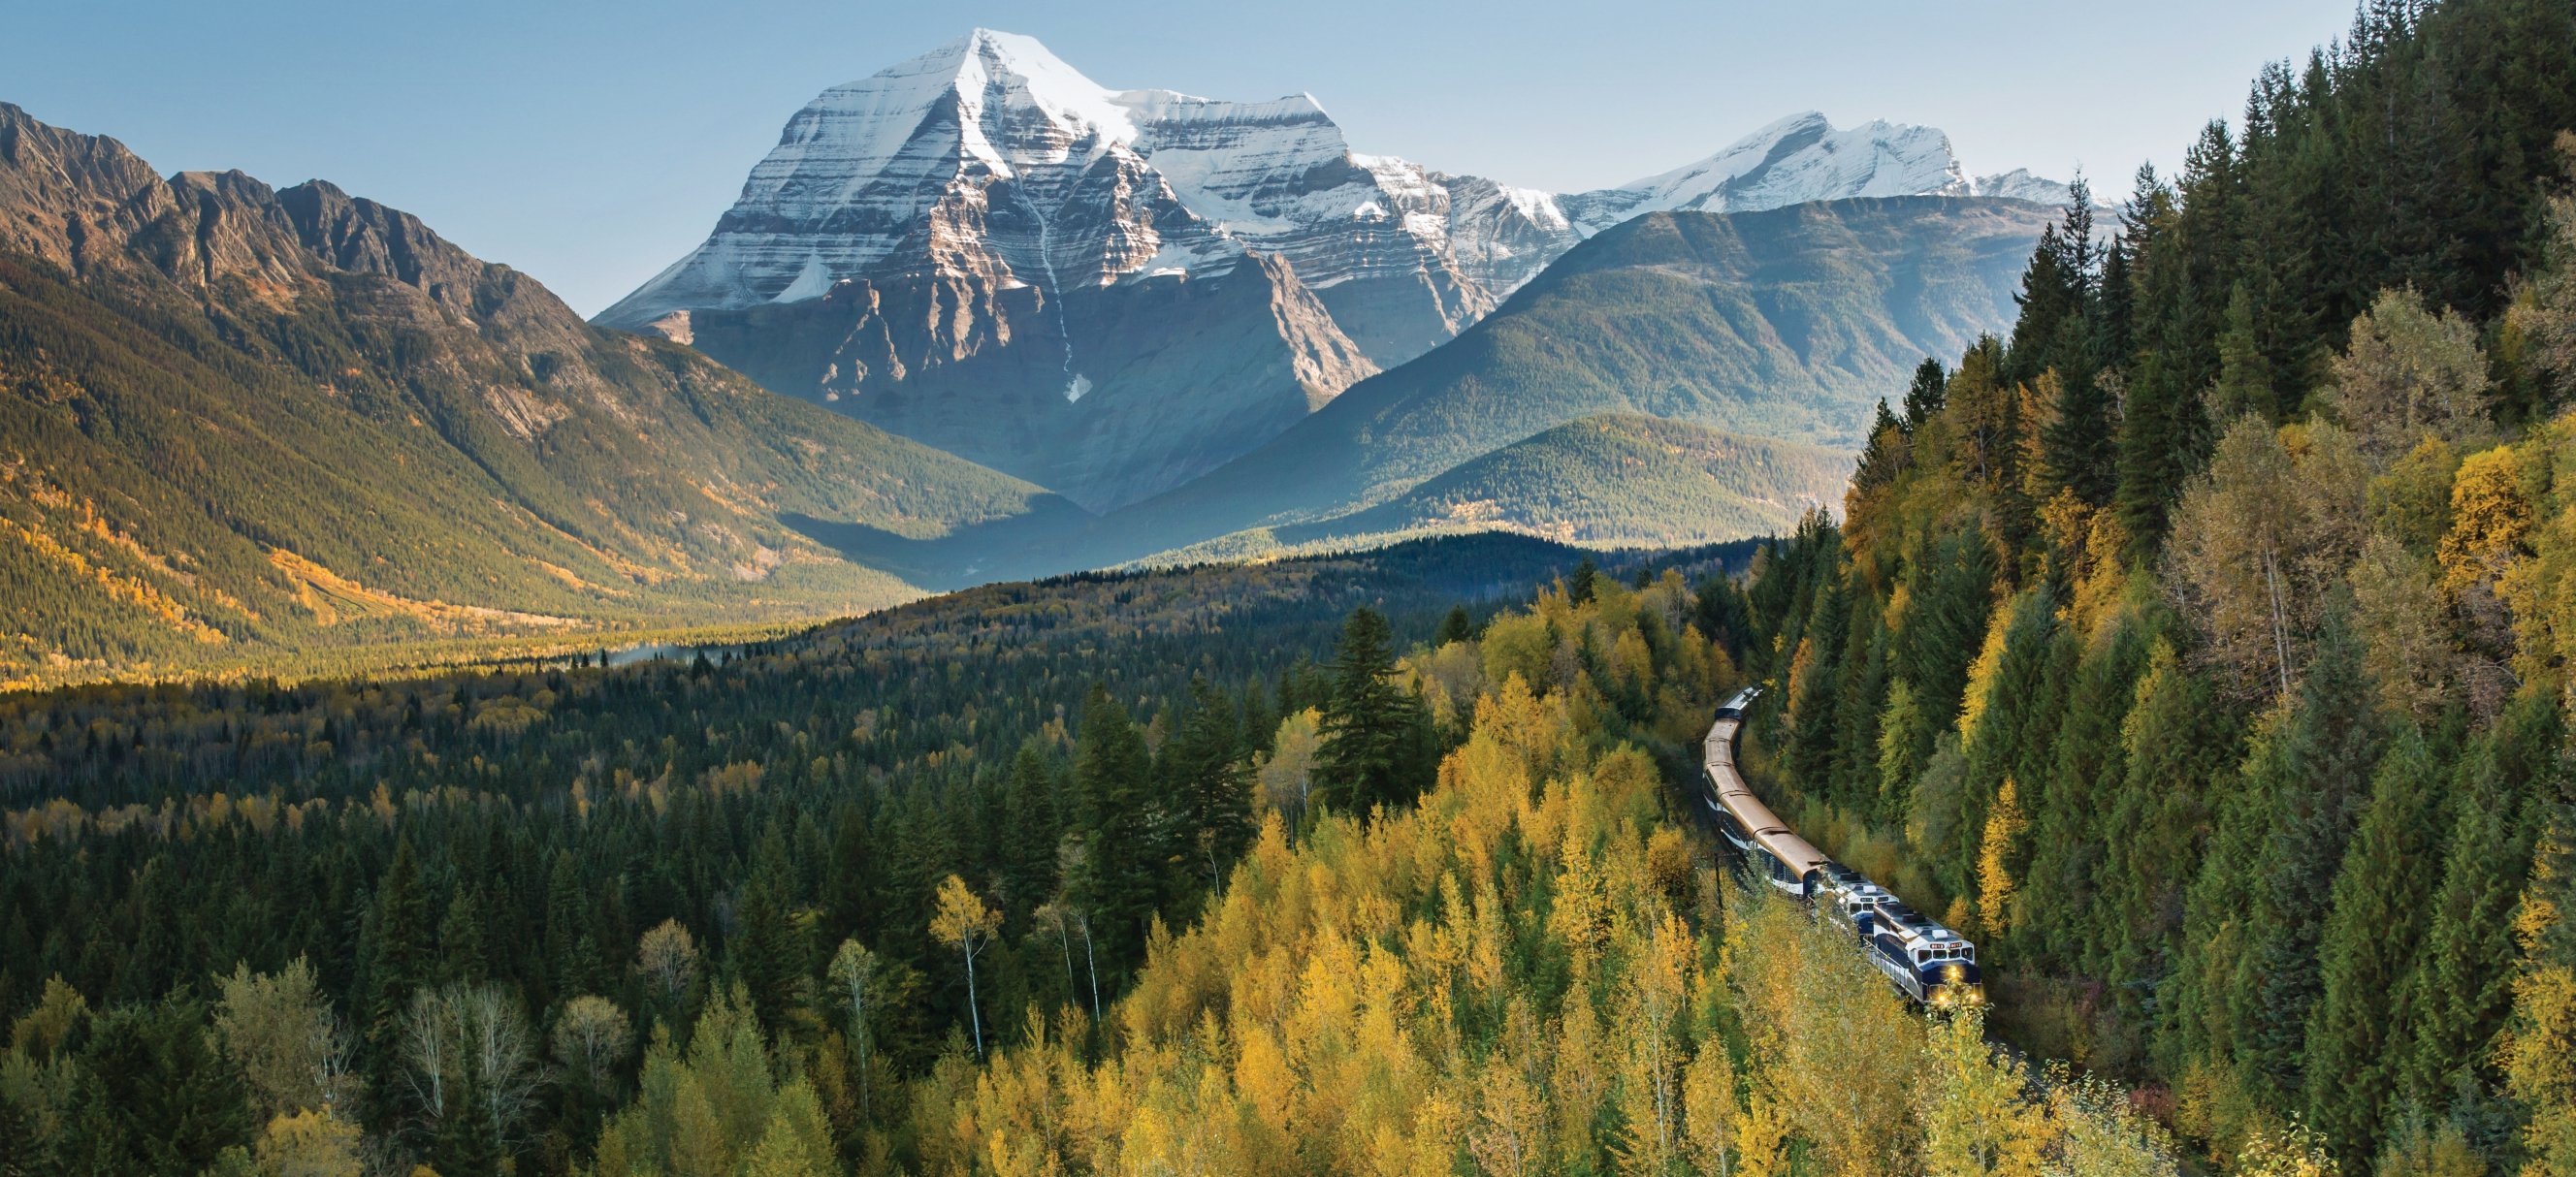 Rocky Mountaineer train with Mount Robson